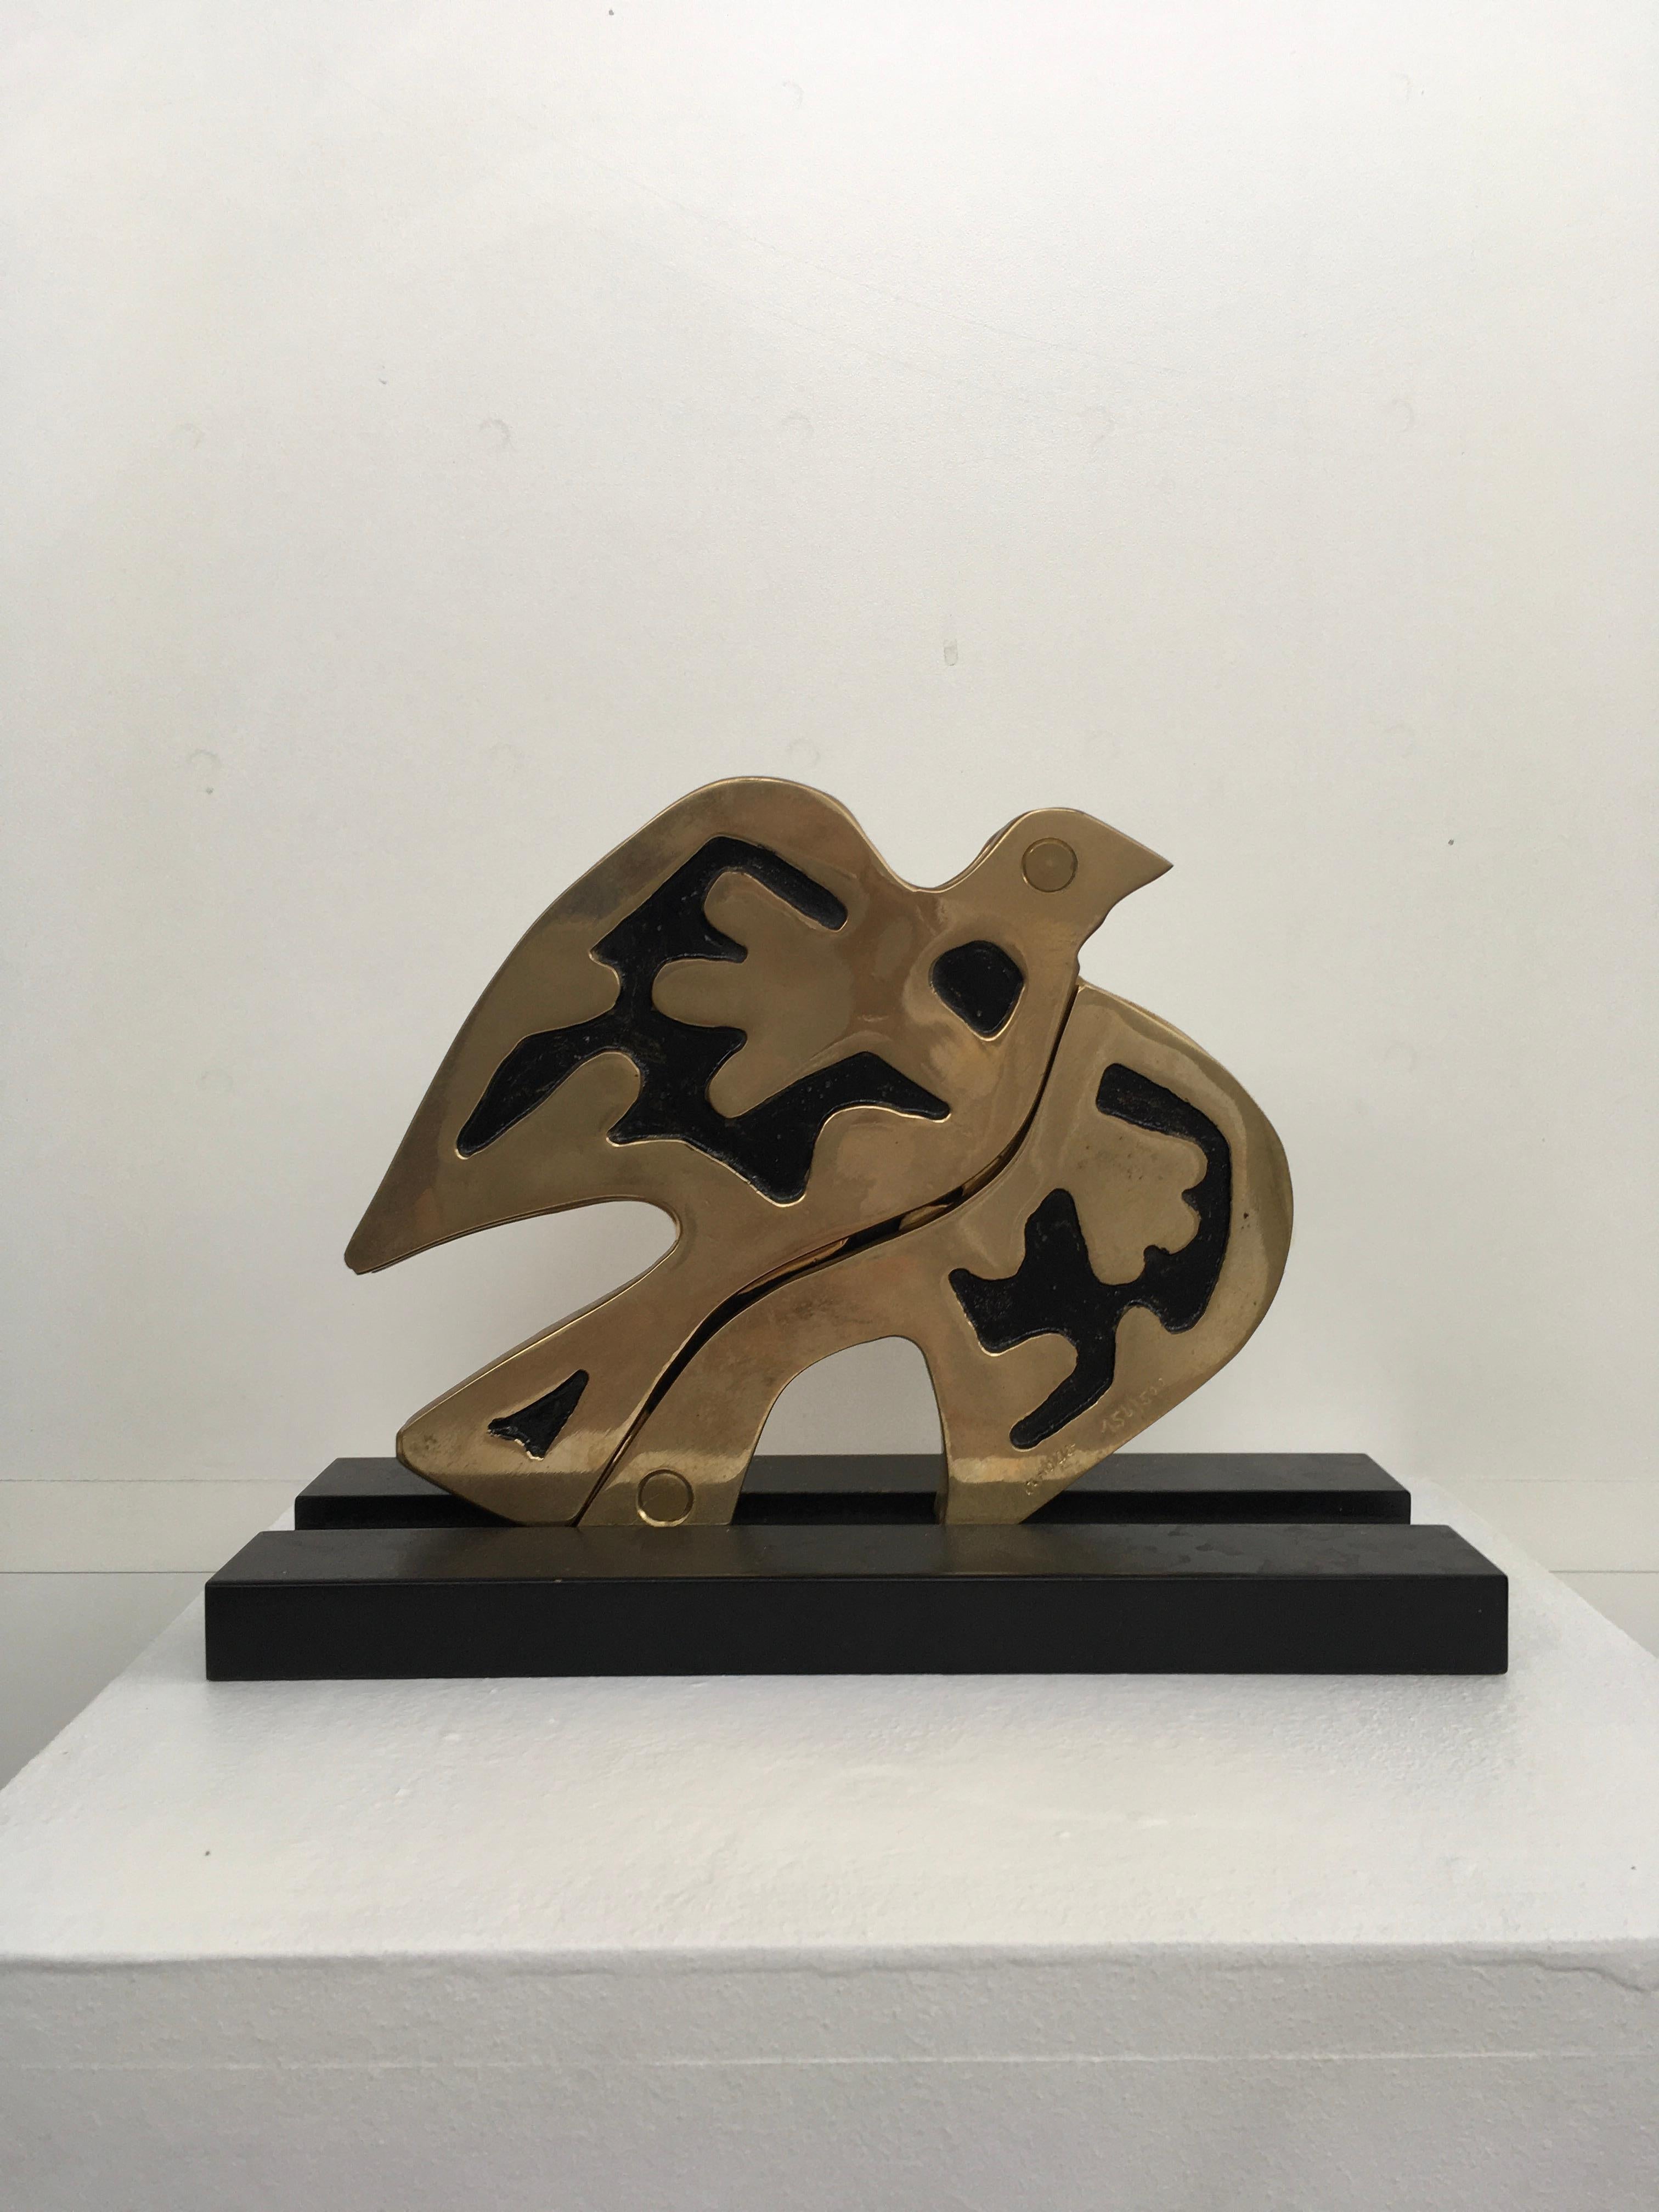 This sculpture is a multiple 1 piece of 500 realized in 1980 by the well known Italian artist Bruno Chersicla.
All the pieces are numbered and signed by the artist and completed by the Certificate of the artist and the Editor who made the